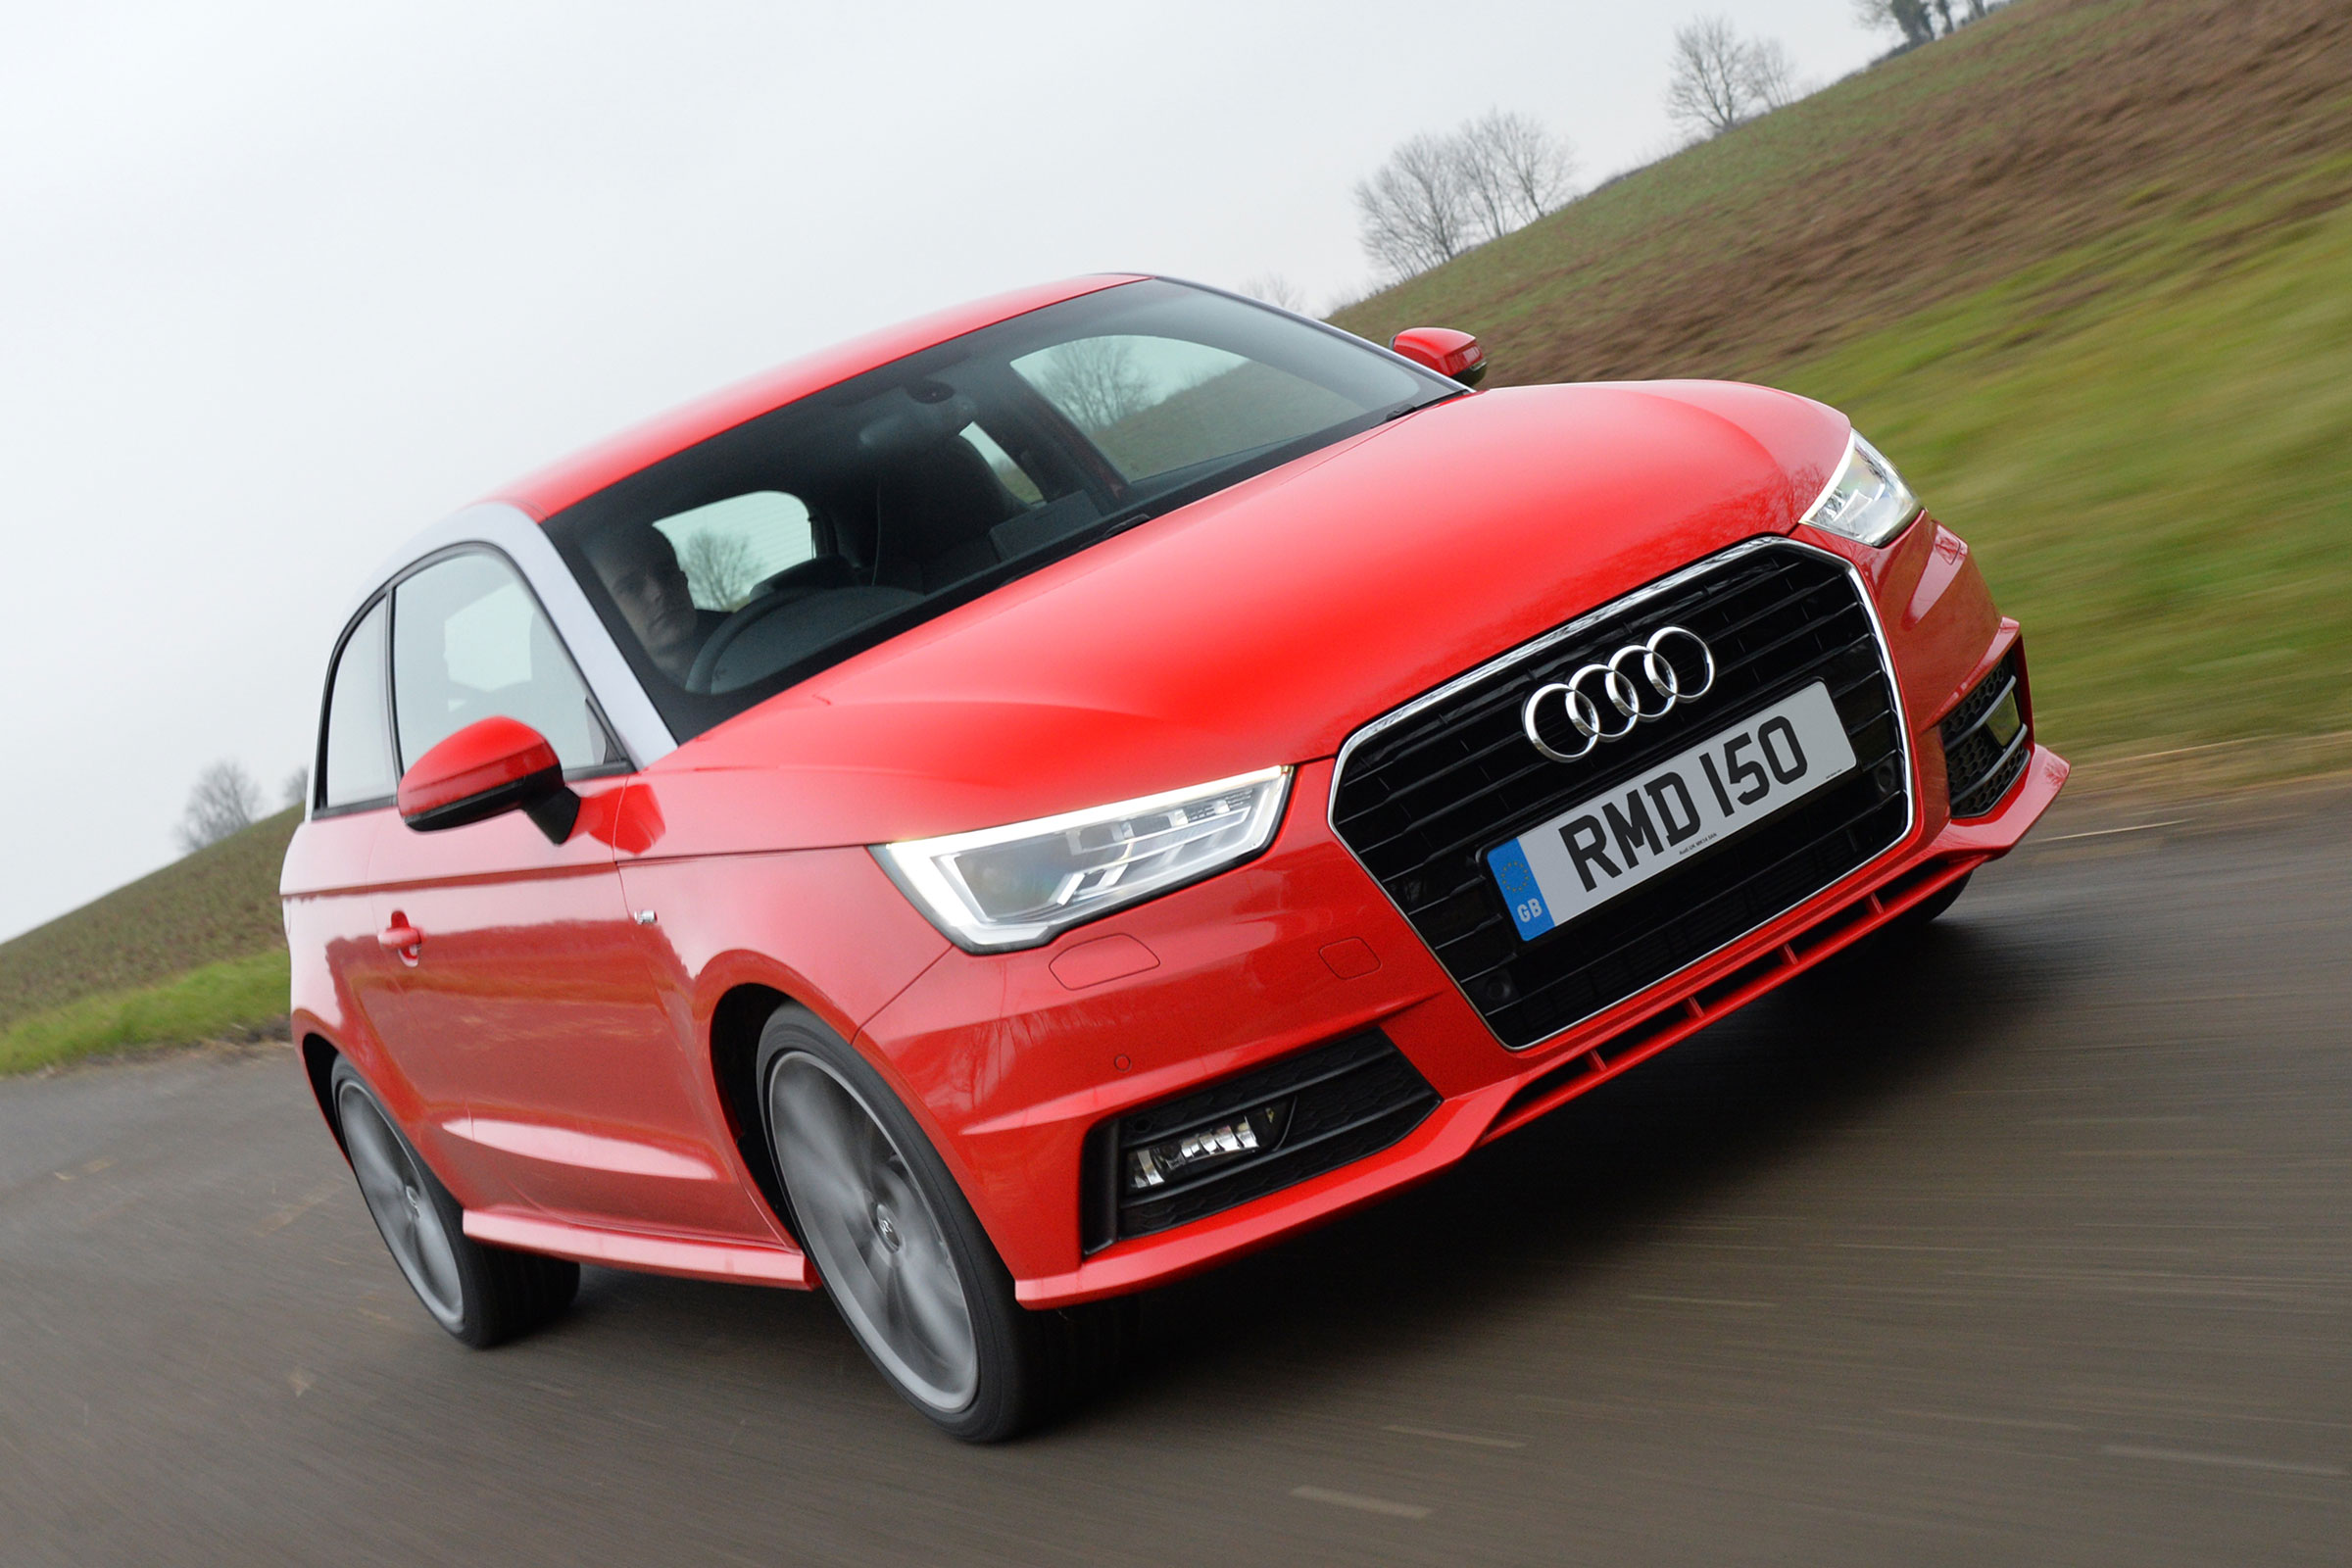 Used Audi A1 review: 2010 to 2019 (Mk1) - Reliability and common problems